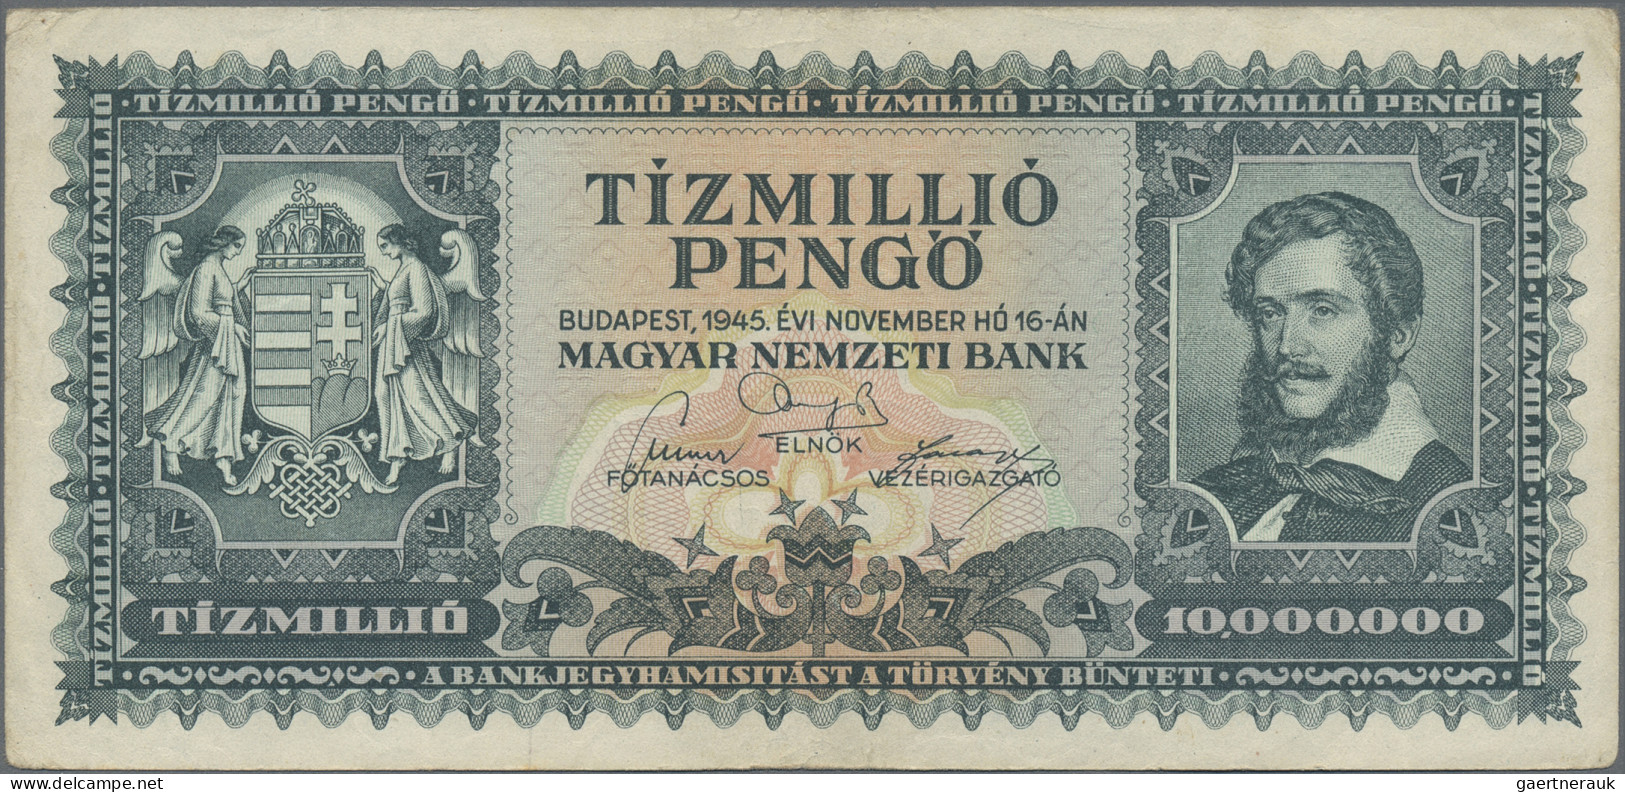 Hungary: Hungary, Inflation Lot With 13 Banknotes 1945-1946 Series, 500 Pengö – - Ungarn